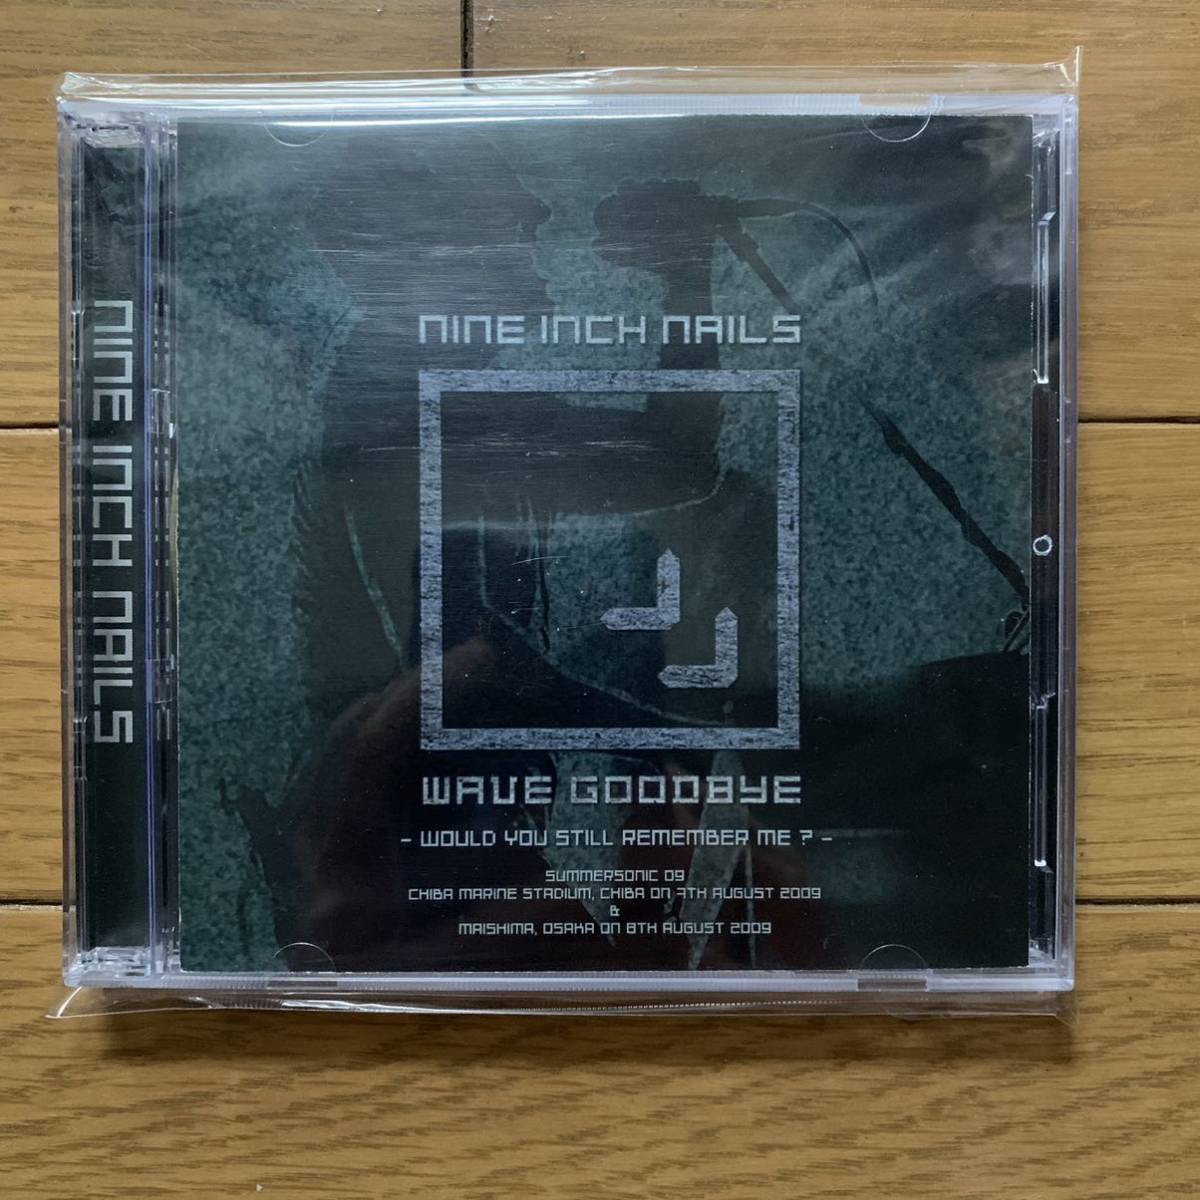 NINE INCH NAILS / WAVE GOODBYE : WOULD YOU STILL REMEMBER ME?の画像1